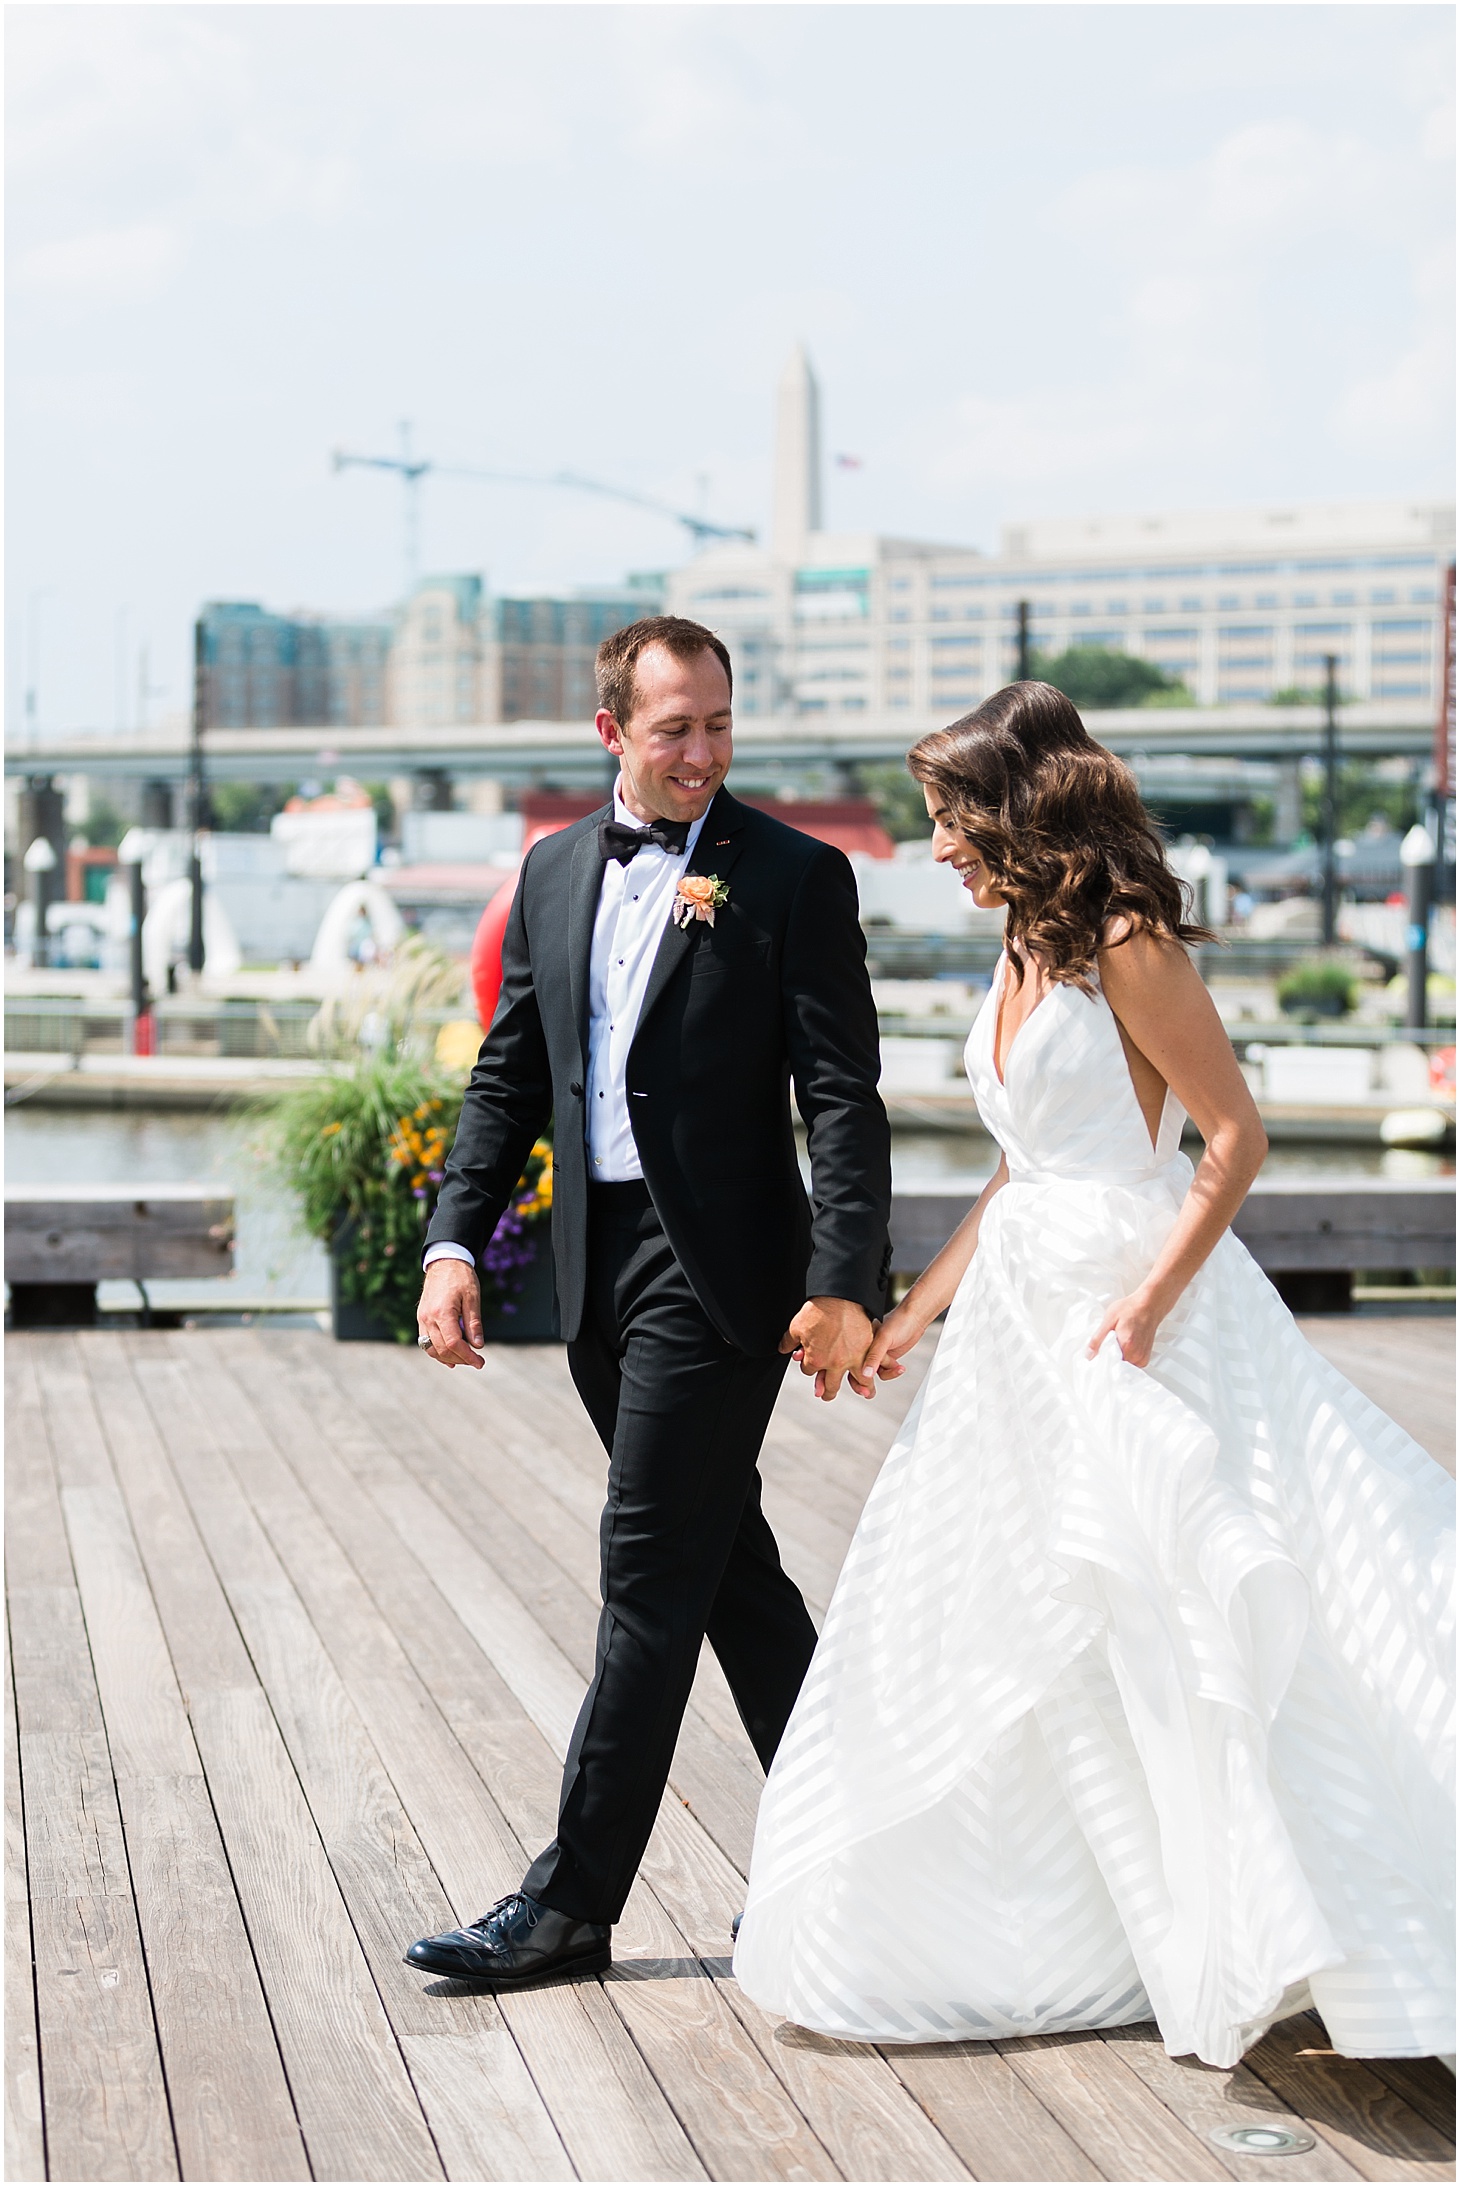 First Look at The Wharf | Chic and Modern Interfaith Wedding at District Winery in Washington, DC | Sarah Bradshaw Photography